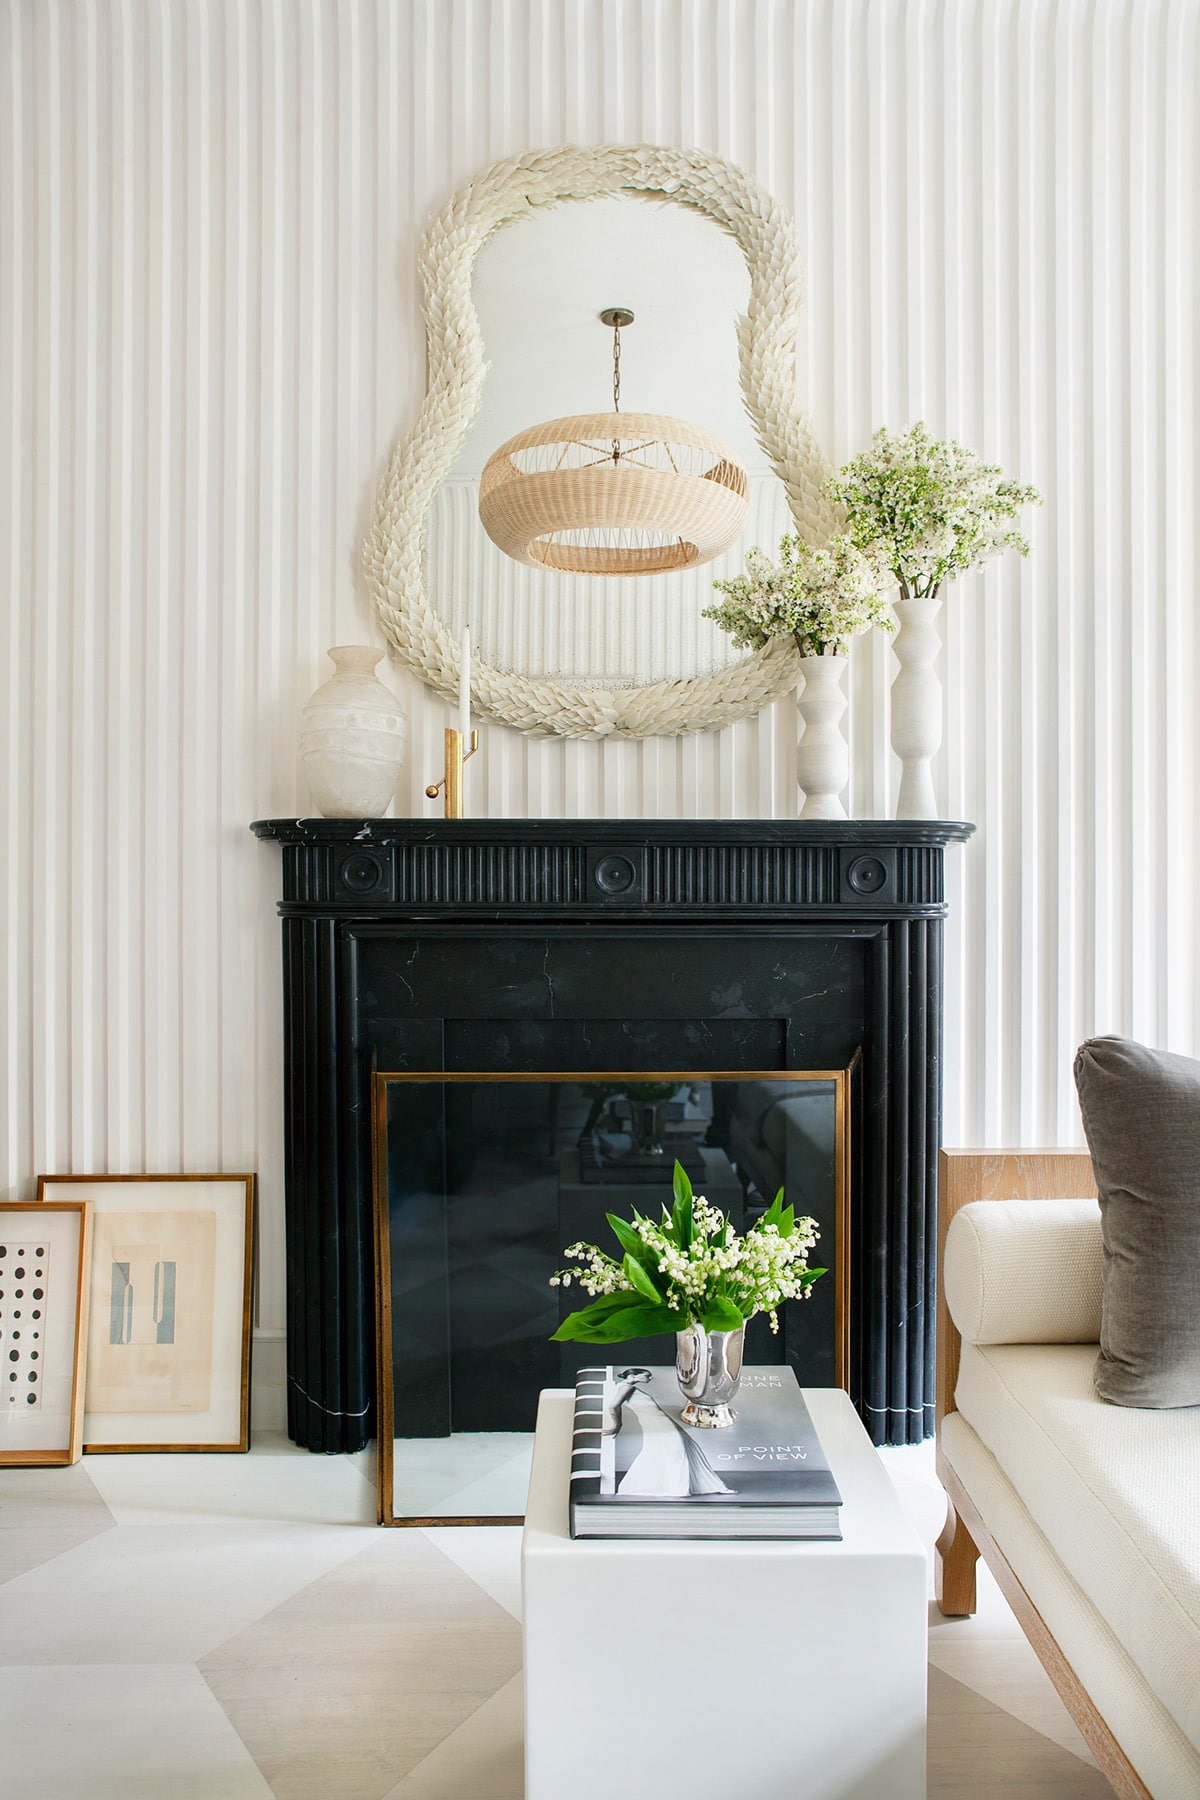 fluted plaster walls and a classic black fireplace in a sitting room kips bay showhouse by sarah bartholomew